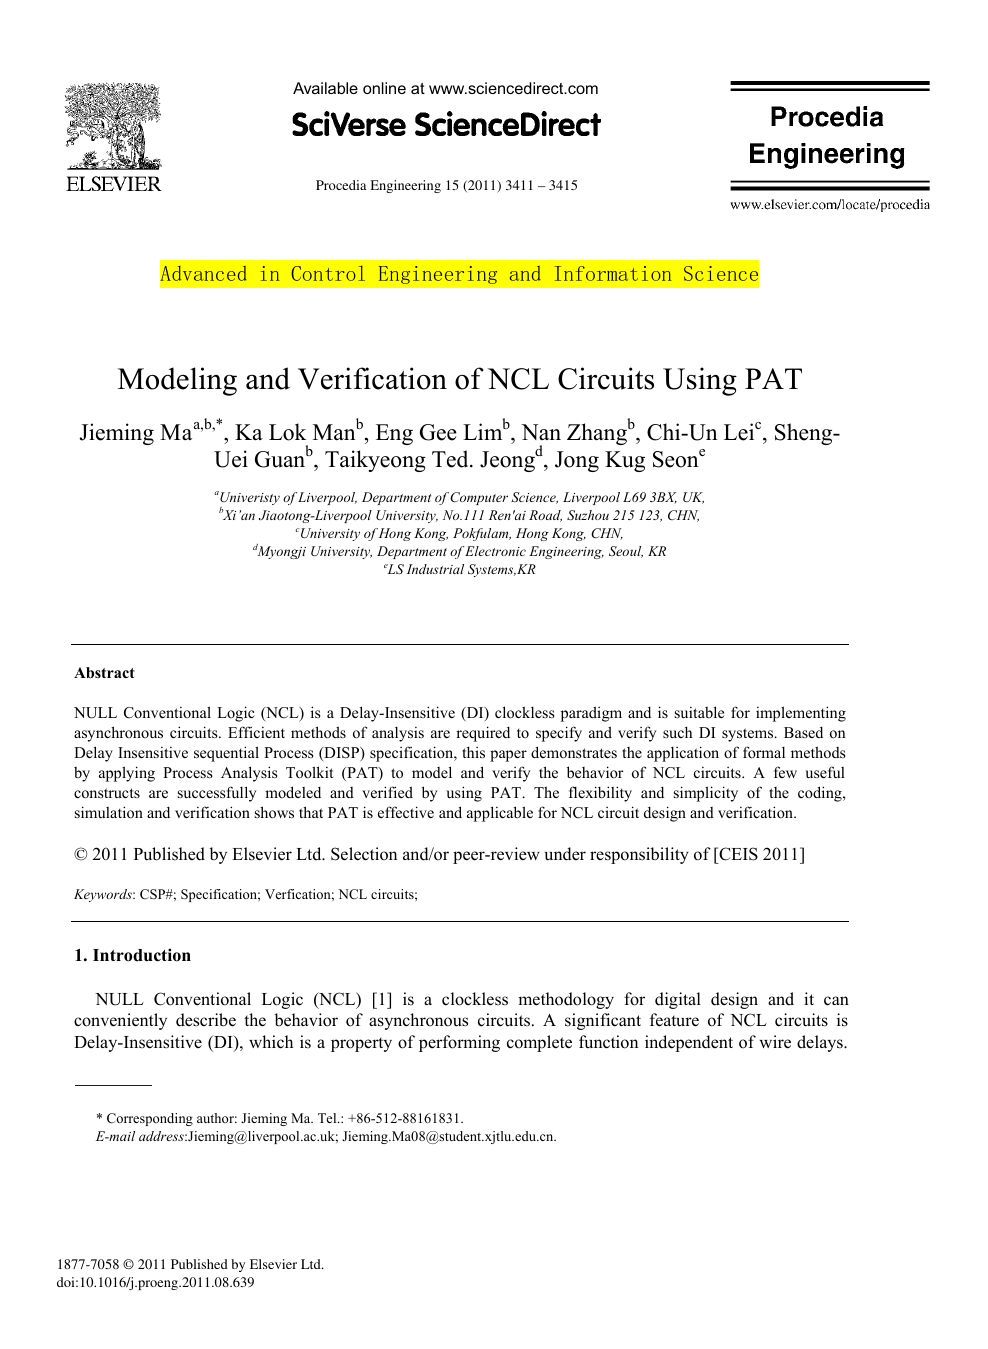 Modeling And Verification Of Ncl Circuits Using Pat Topic Of Research Paper In Materials Engineering Download Scholarly Article Pdf And Read For Free On Cyberleninka Open Science Hub